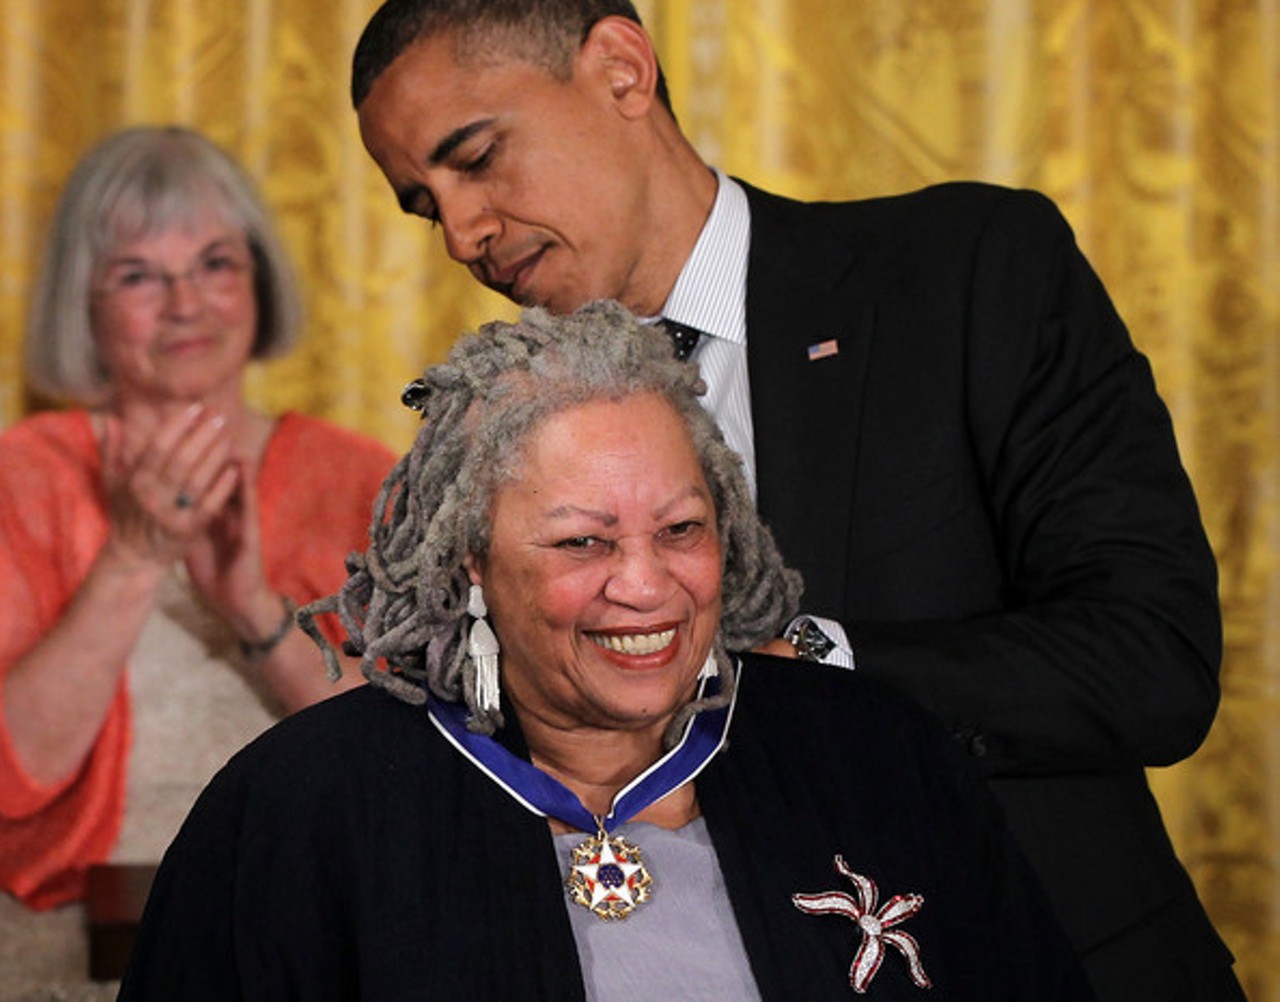  Toni Morrison
One of the most decorated writers in American history, Morrison grew up in Lorain. In 1988, she won the Pulitzer Prize for her novel Beloved. In 1993, she was awarded the Nobel Prize for Literature. Then, in 2012, former President Barack Obama awarded Morrison the Presidential Medal of Freedom.
Photo via Wikimedia/The White House